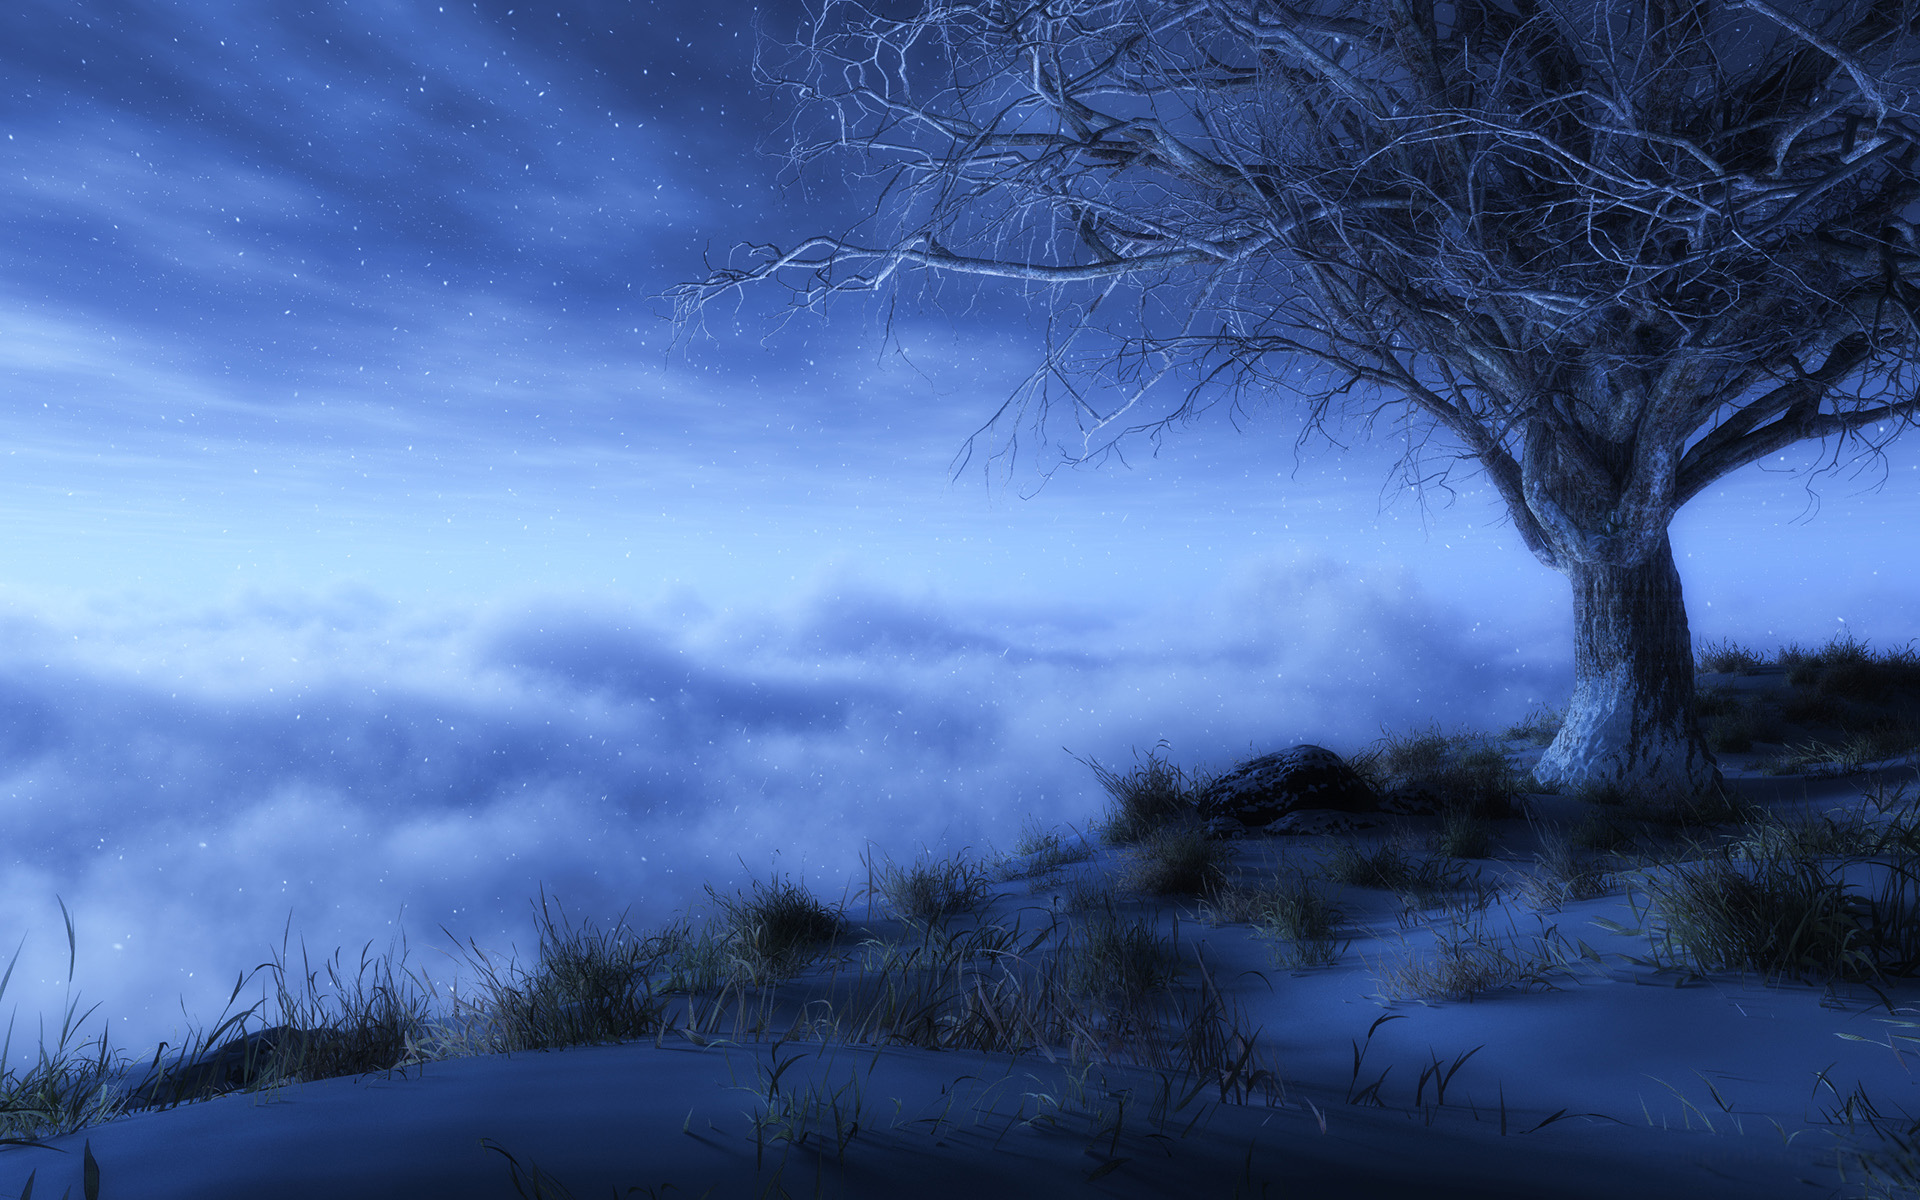 Hd 1080p Images fantasy, tree, sky, lonely tree